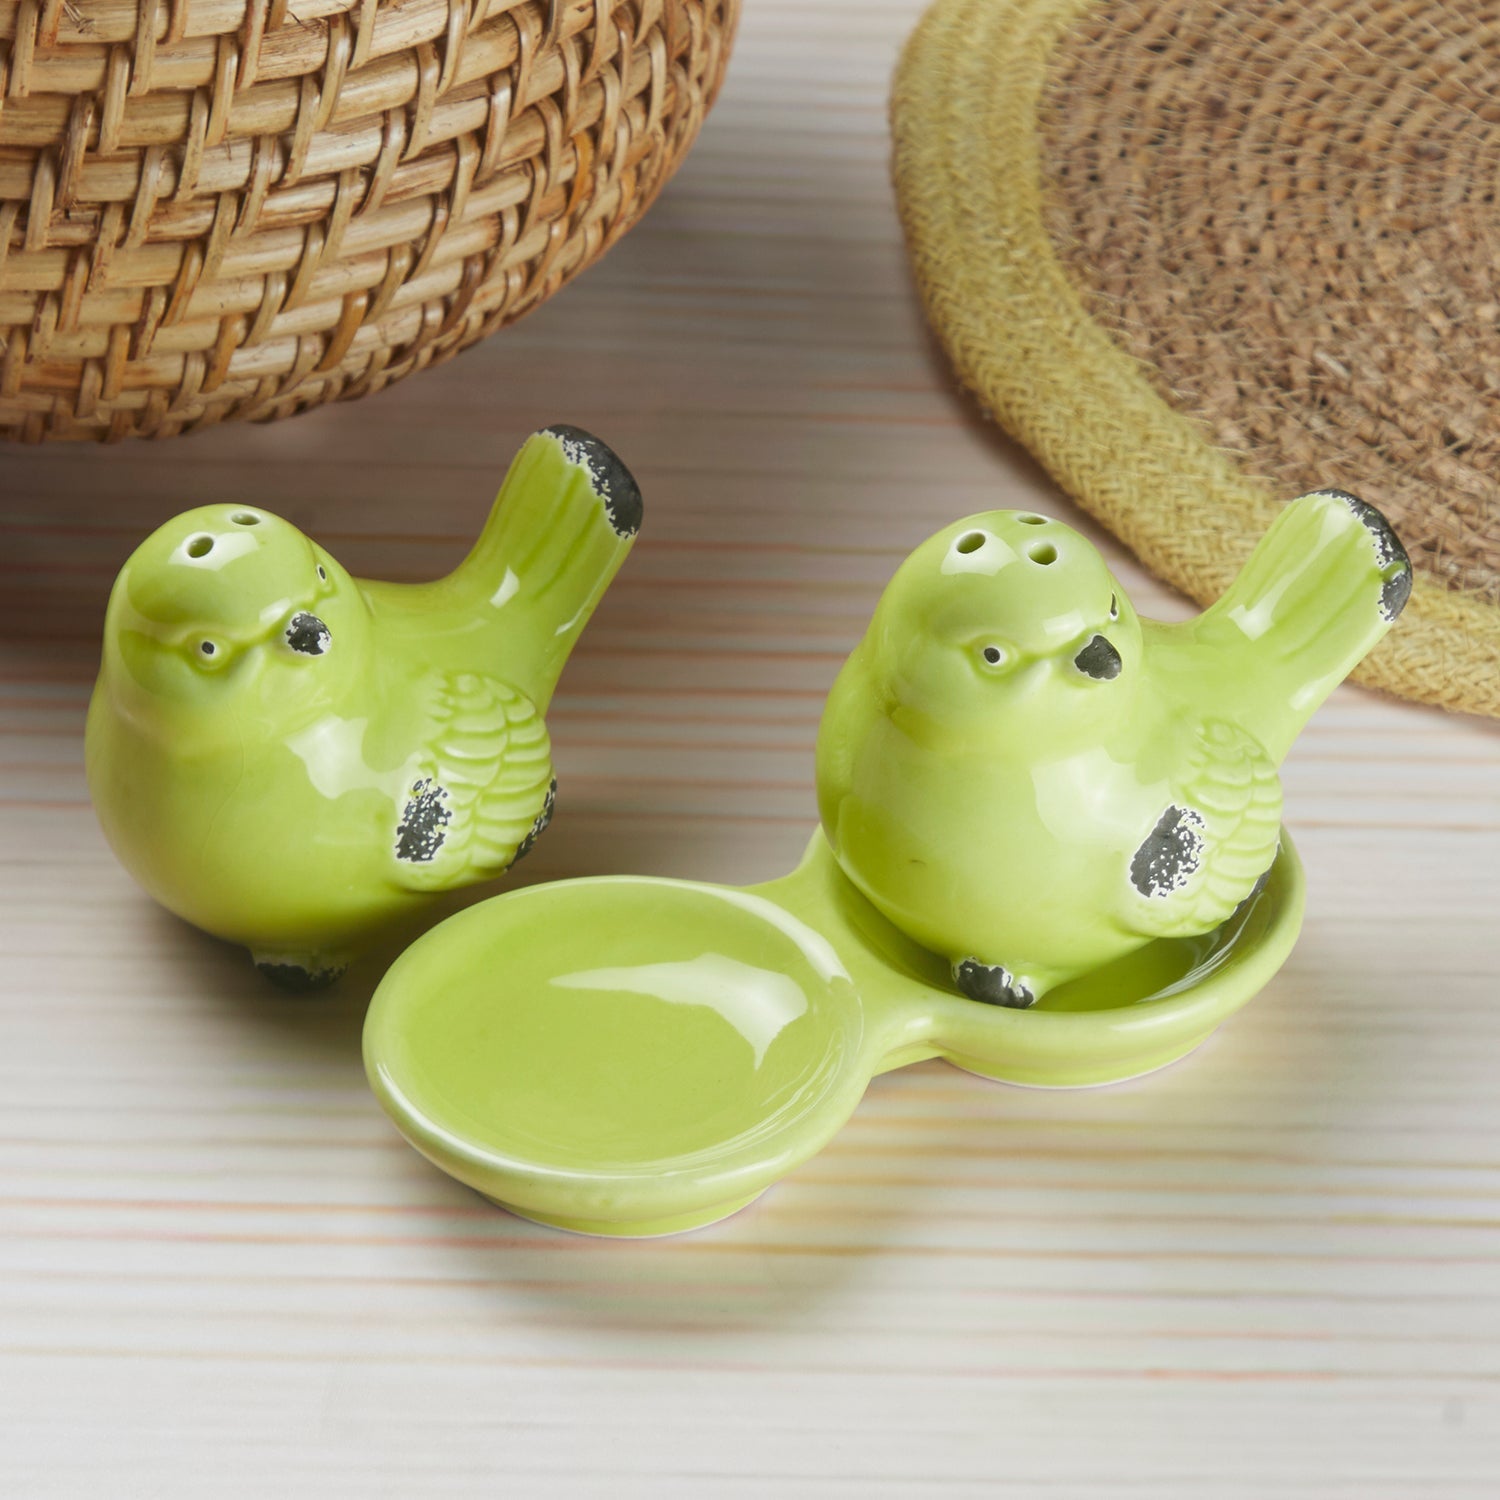 Ceramic Salt and Pepper Set with tray, Sparrow, White (10279)